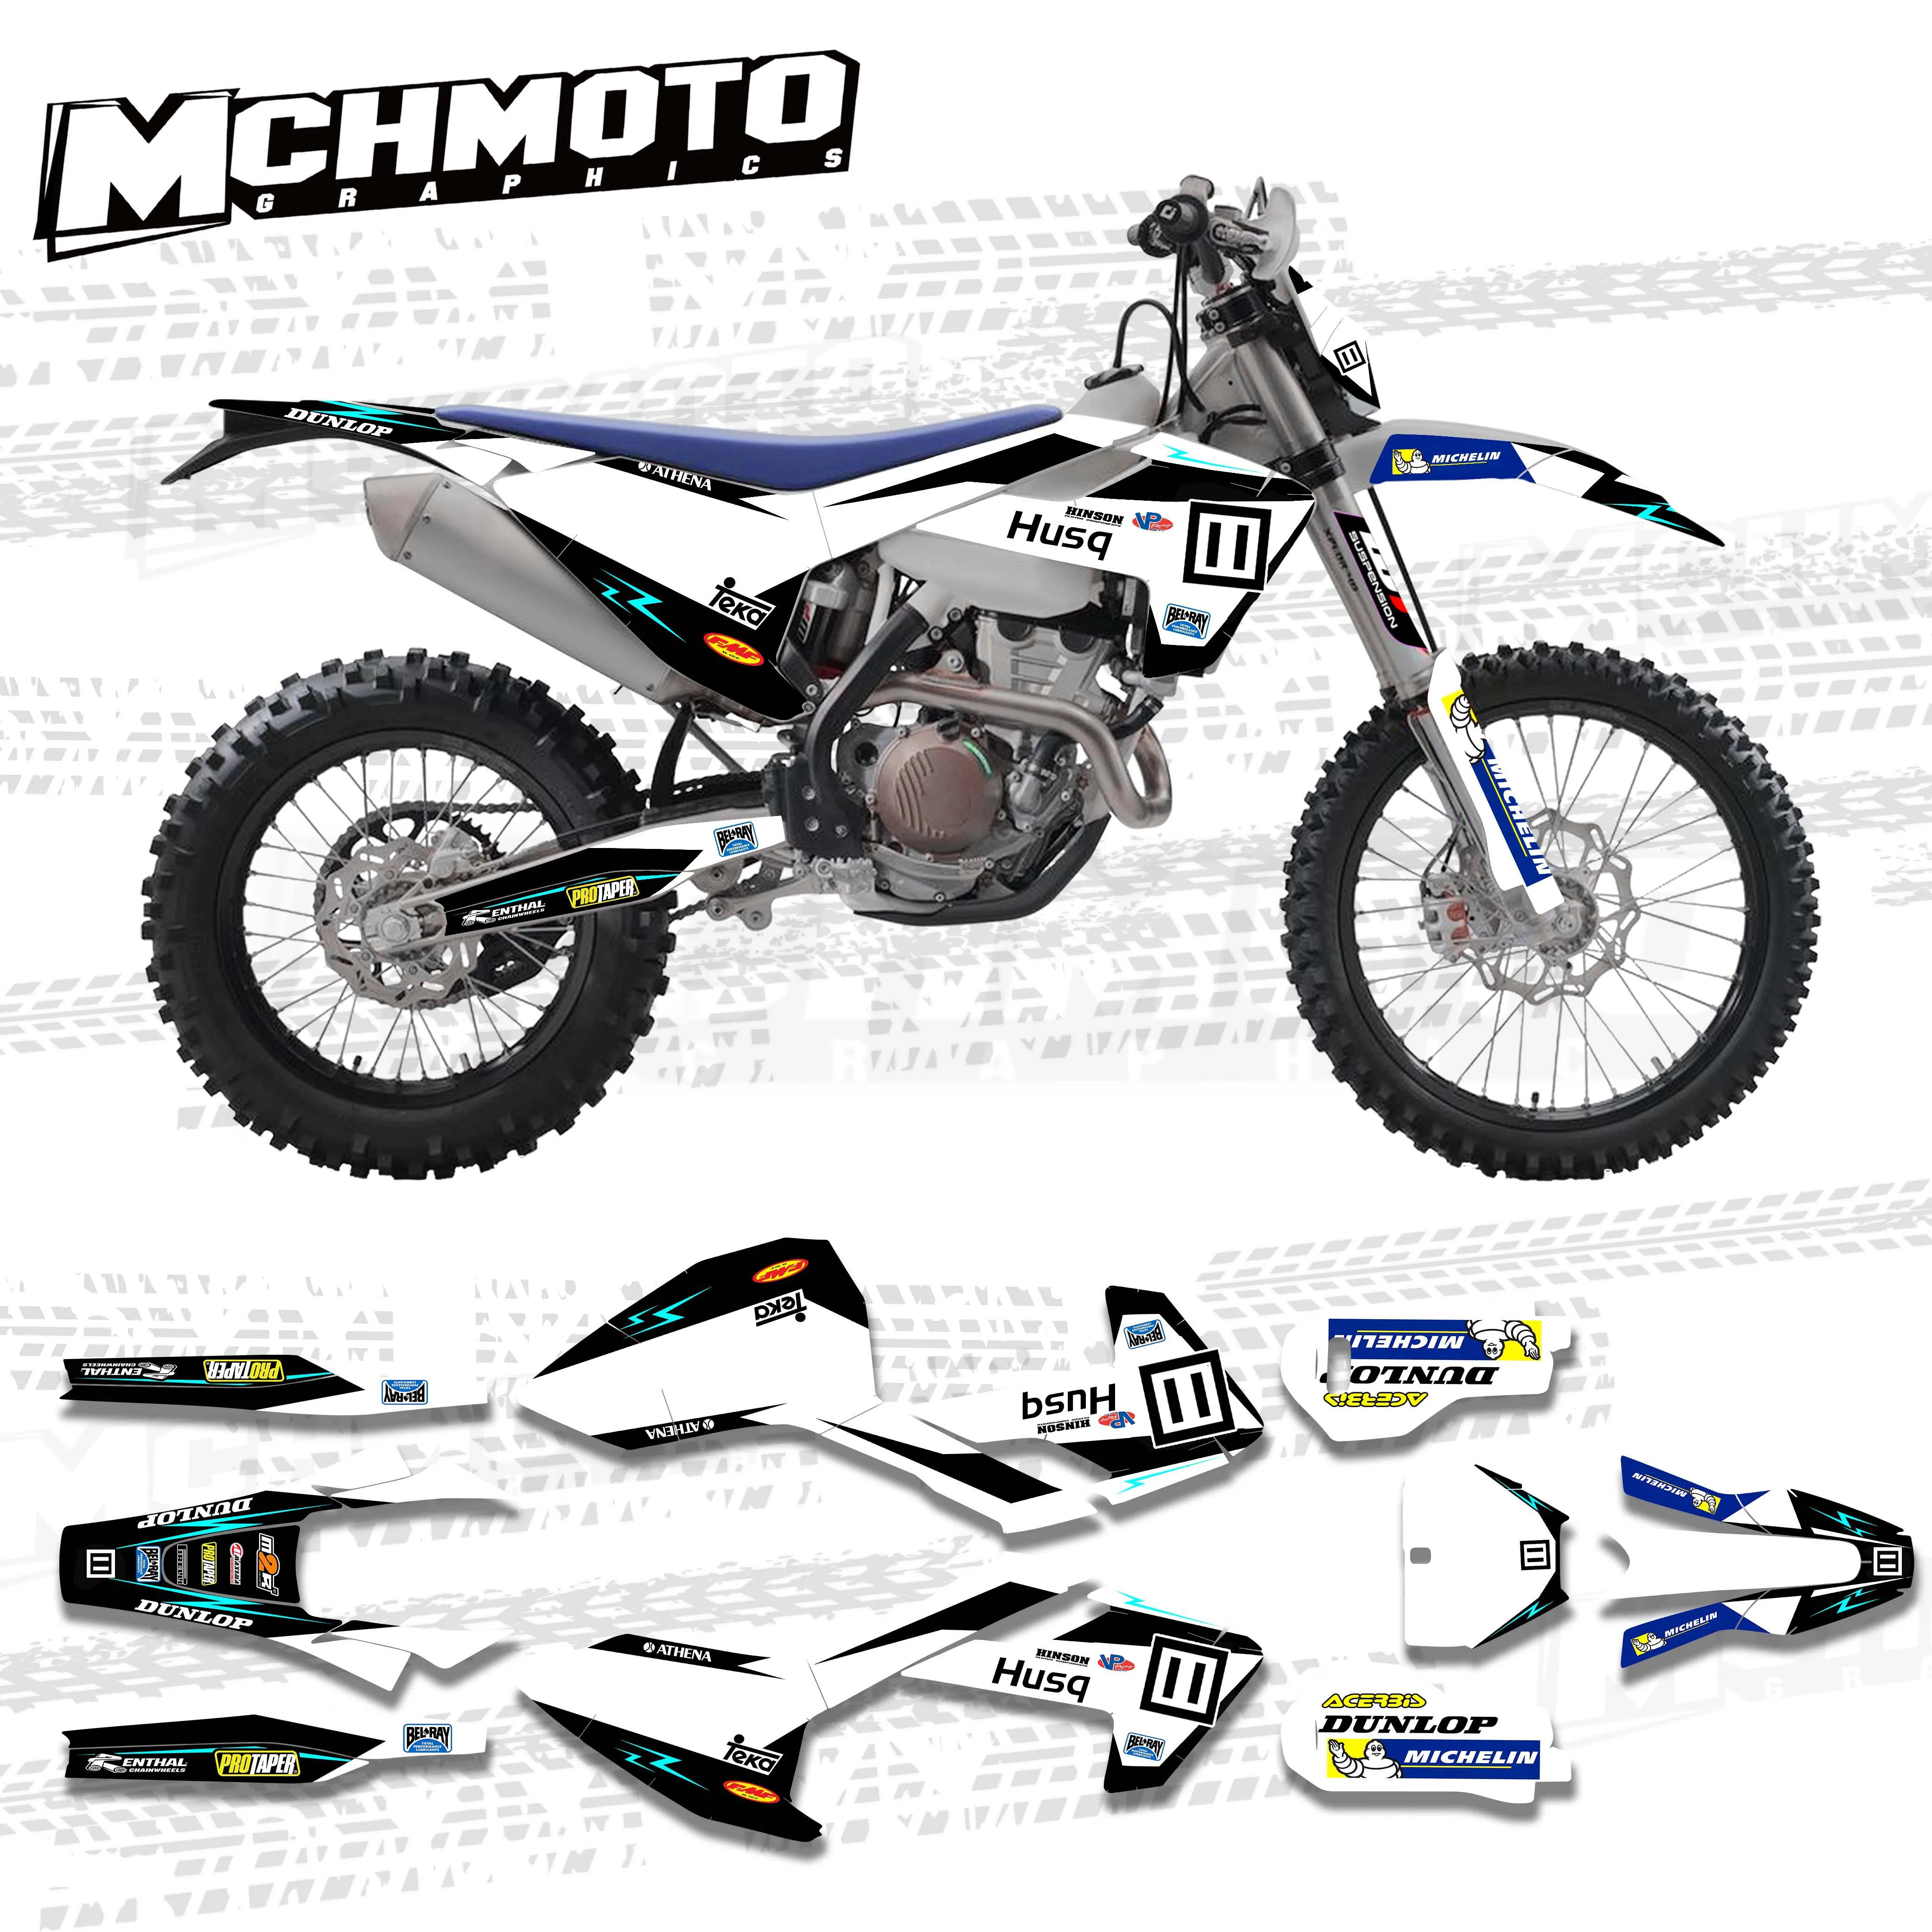 MCHMFG Motorcycle Team Graphic Decal & Sticker Kit DECO For Husqvarna TE FE TX 2017 - 2019 TC FC TX 2016 2018 125 150 200 250 35